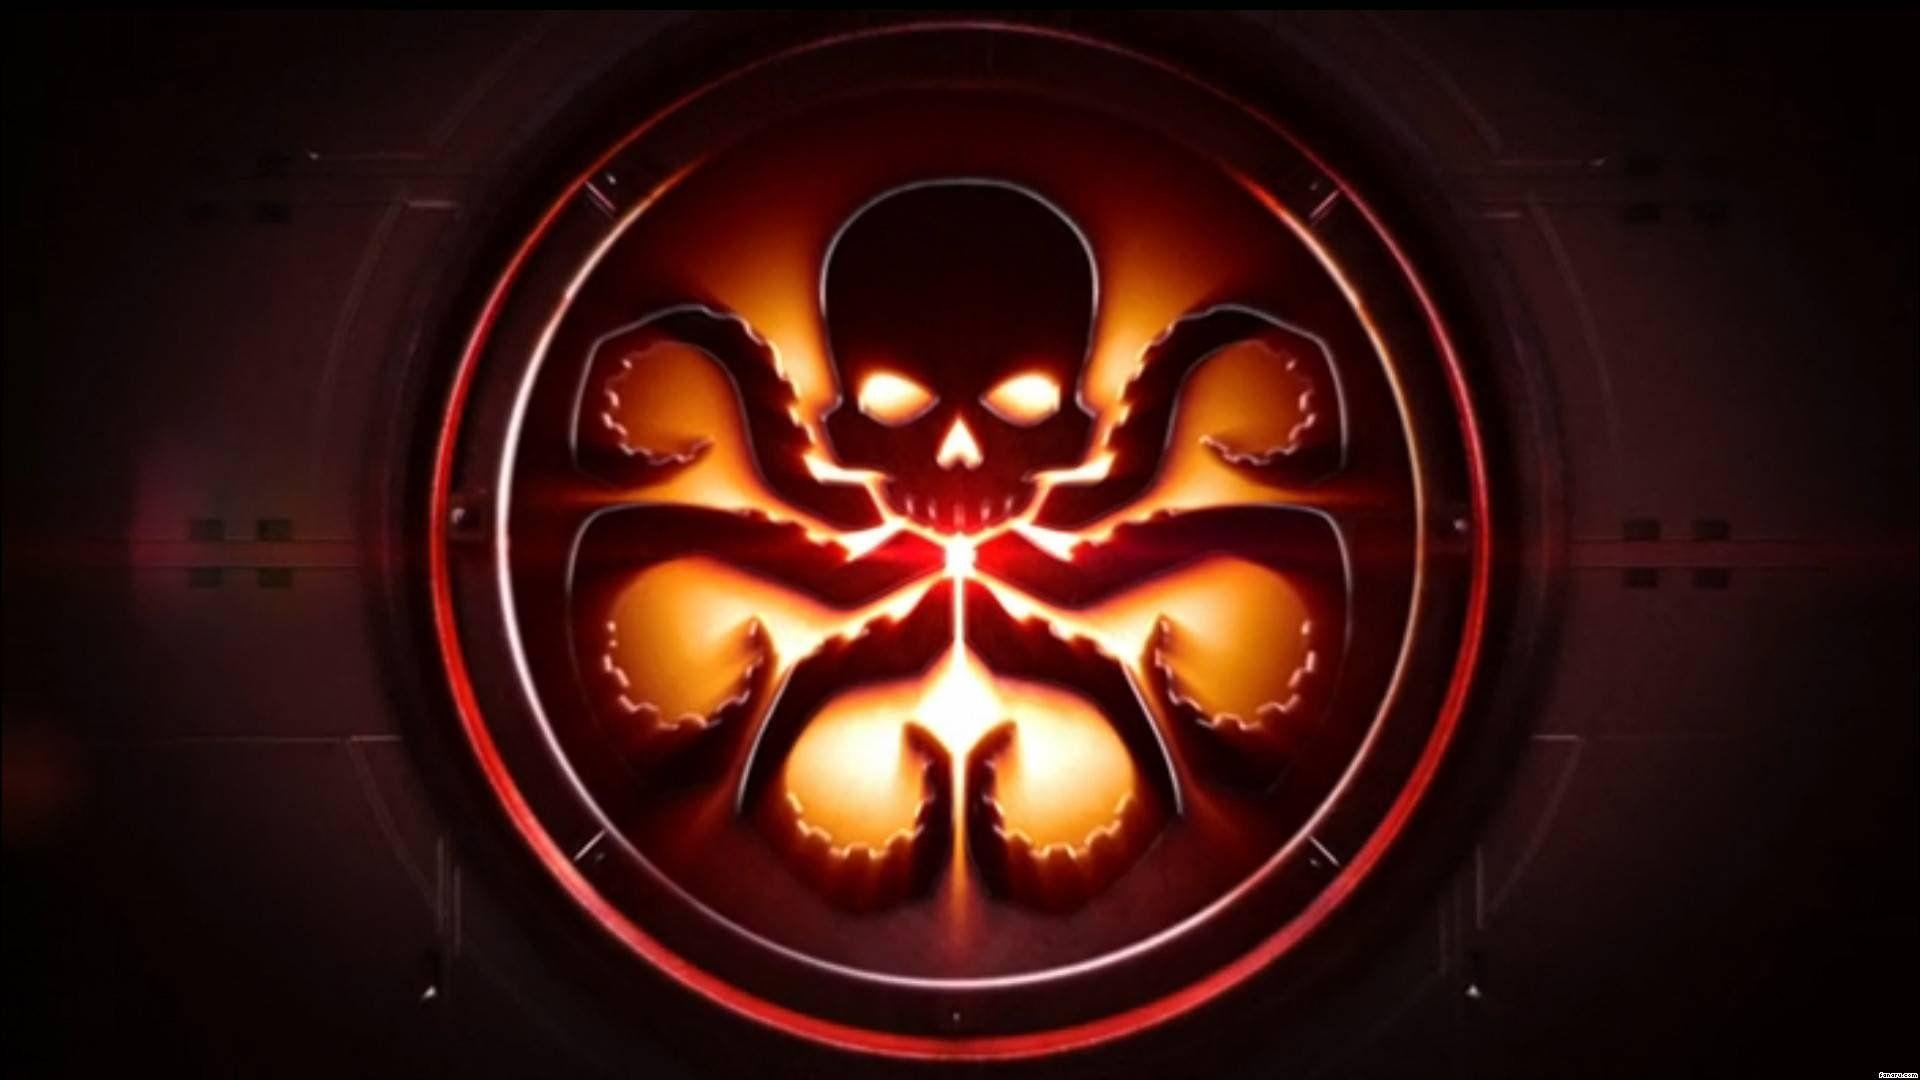 Download Agents Of S.H.I.E.L.D. Hydra Marvel Cinematic Universe